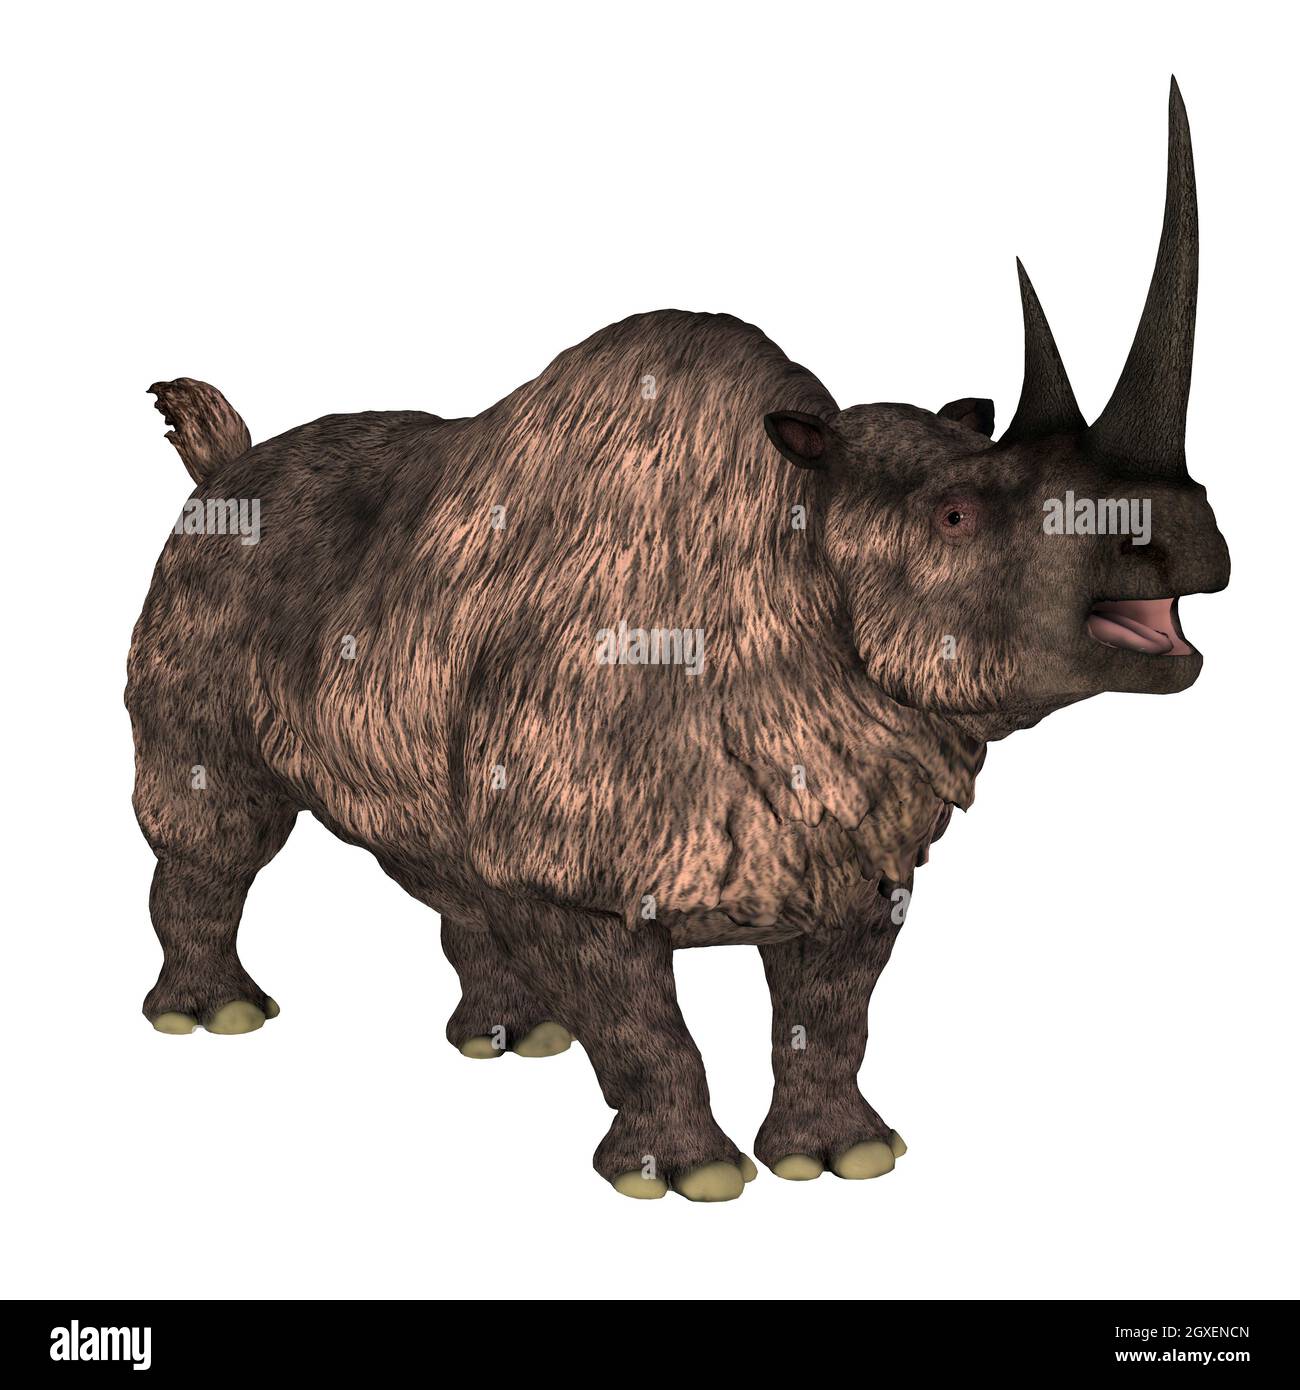 The Woolly rhinoceros was a herbivorous mammal that lived in Europe and Asia during the Pleistocene Period. Stock Photo